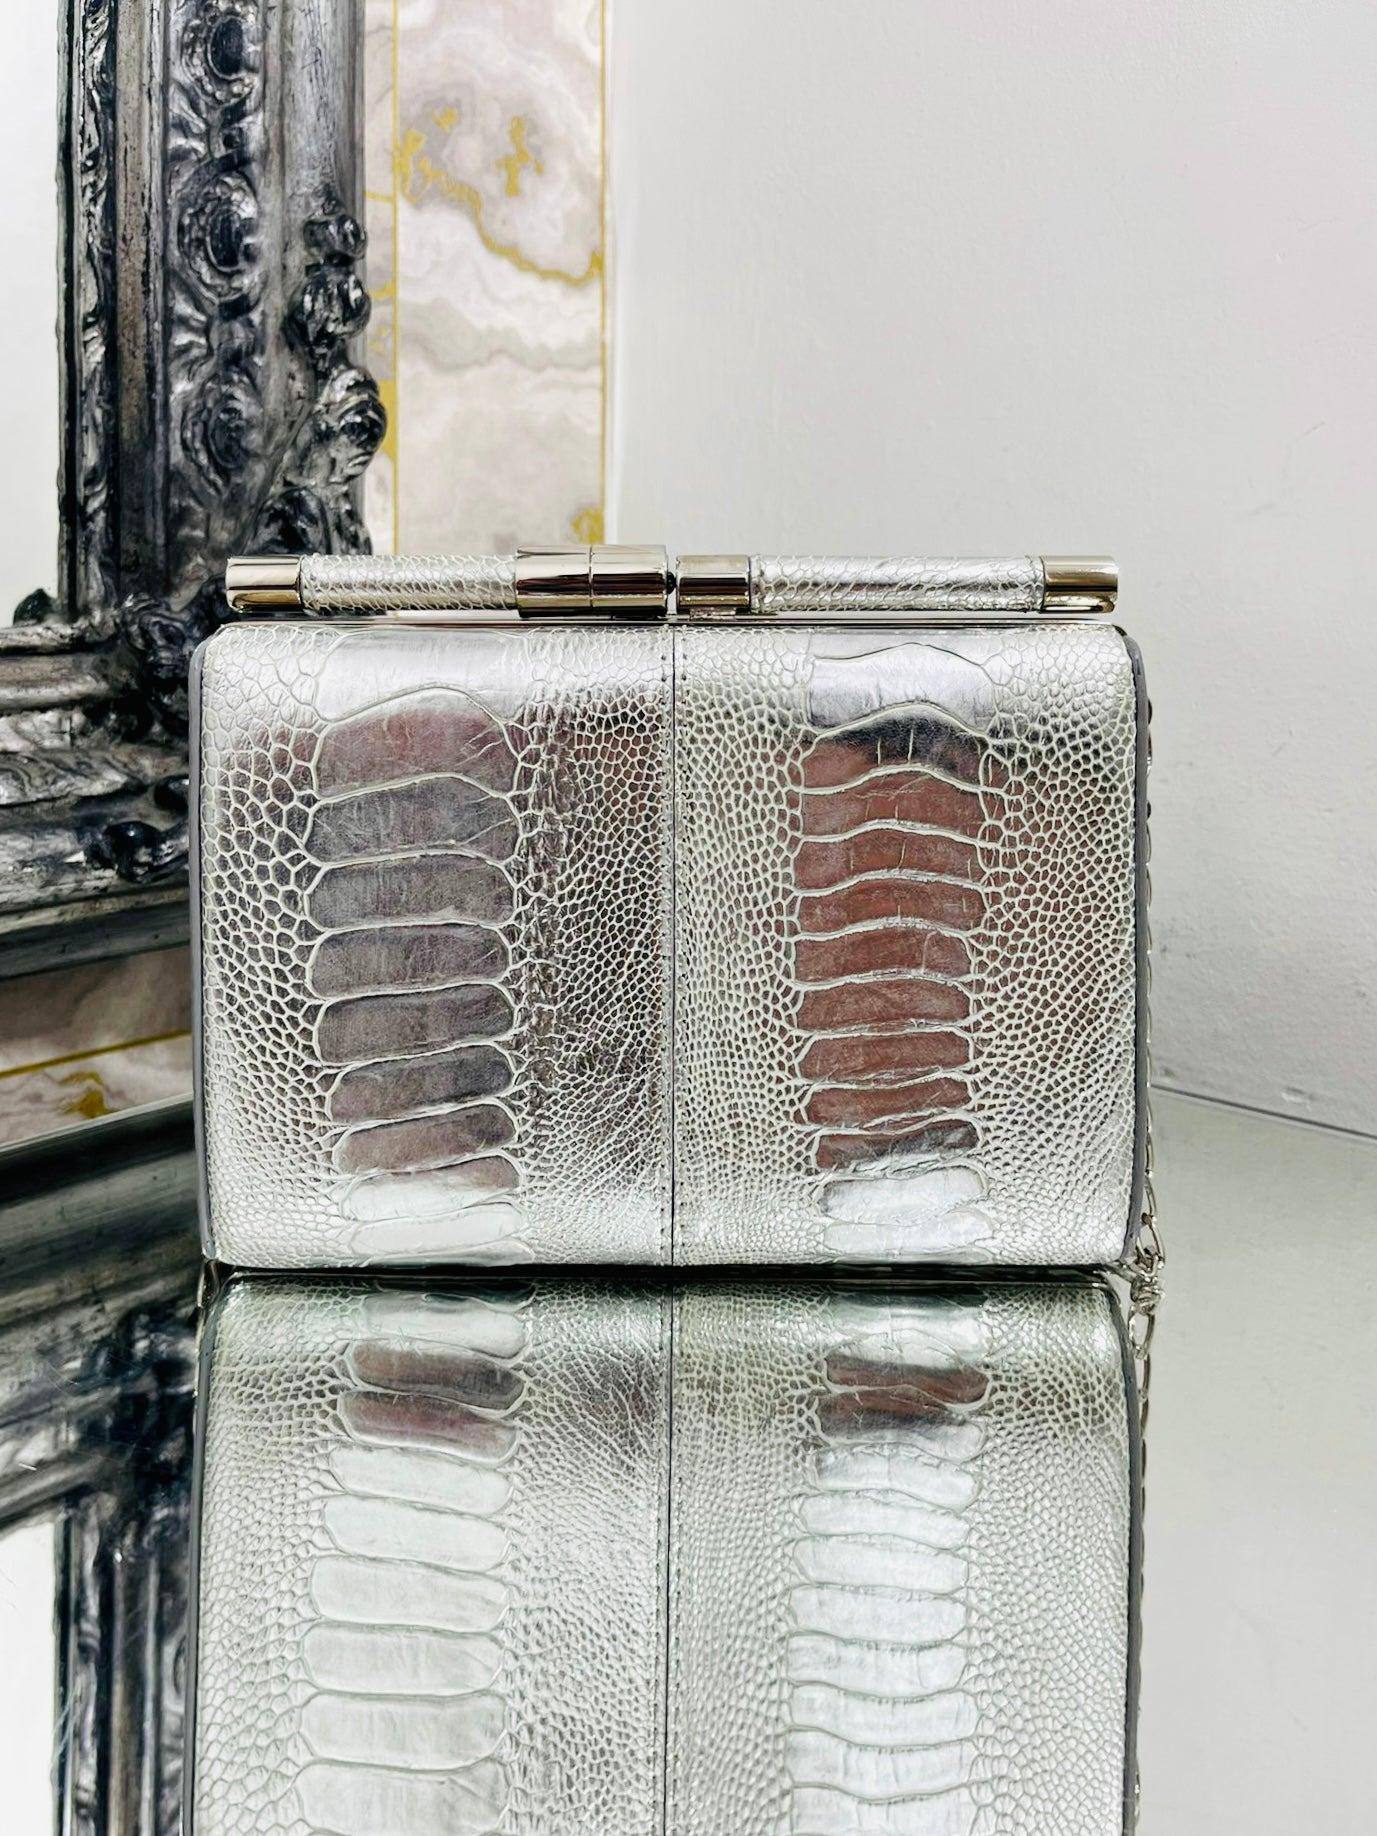 Tyler Ellis Metallic  Lizard Skin Clutch Bag With Chain Strap In Excellent Condition For Sale In London, GB